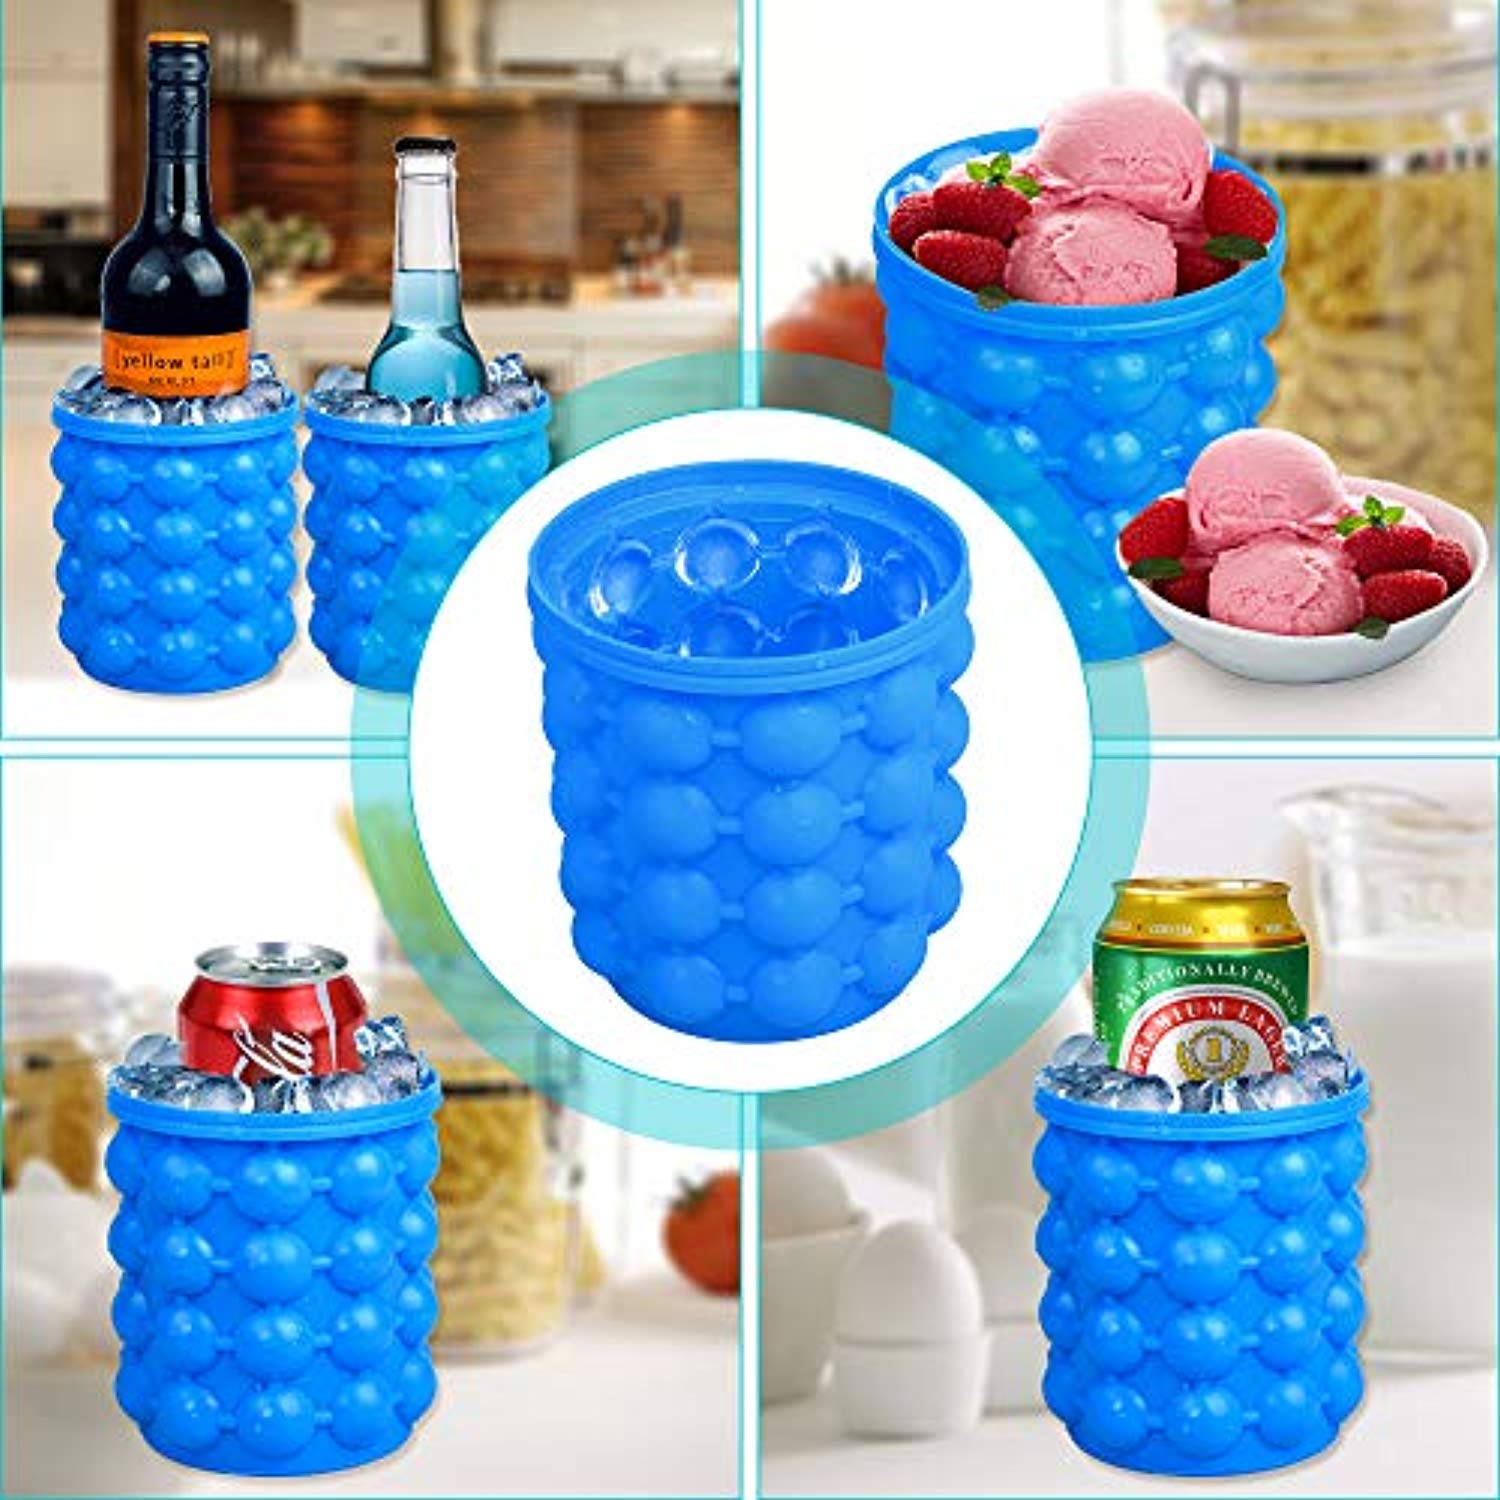 Space Saving Ice Cube Maker,Silicon Ice Cube Maker